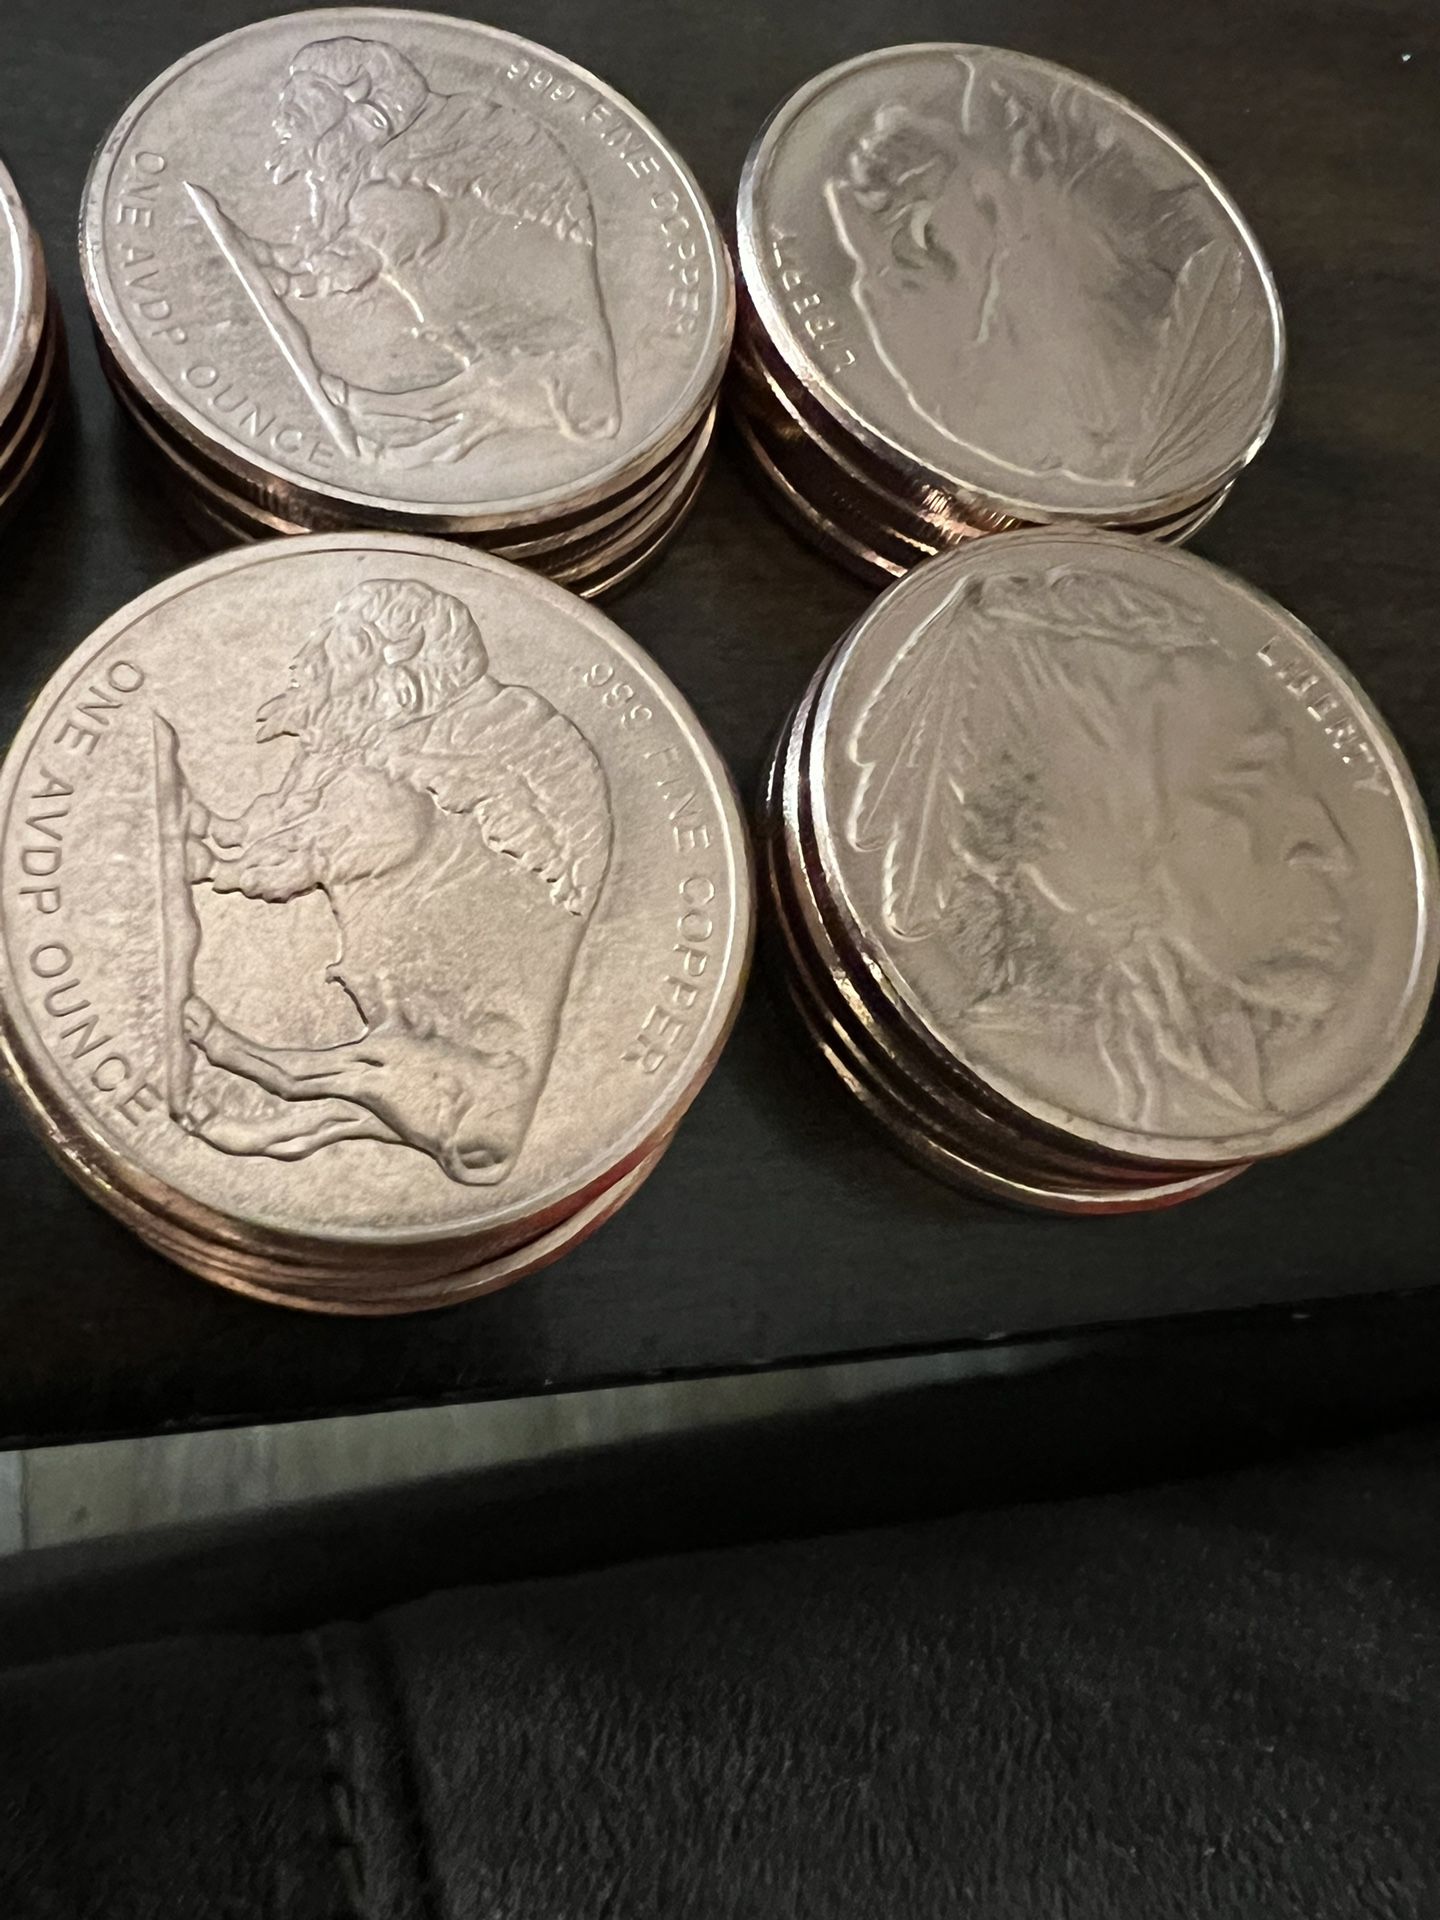 25 Uncirculated 1 Ounce Copper Buffalo Coins for Sale in Wichita, KS ...